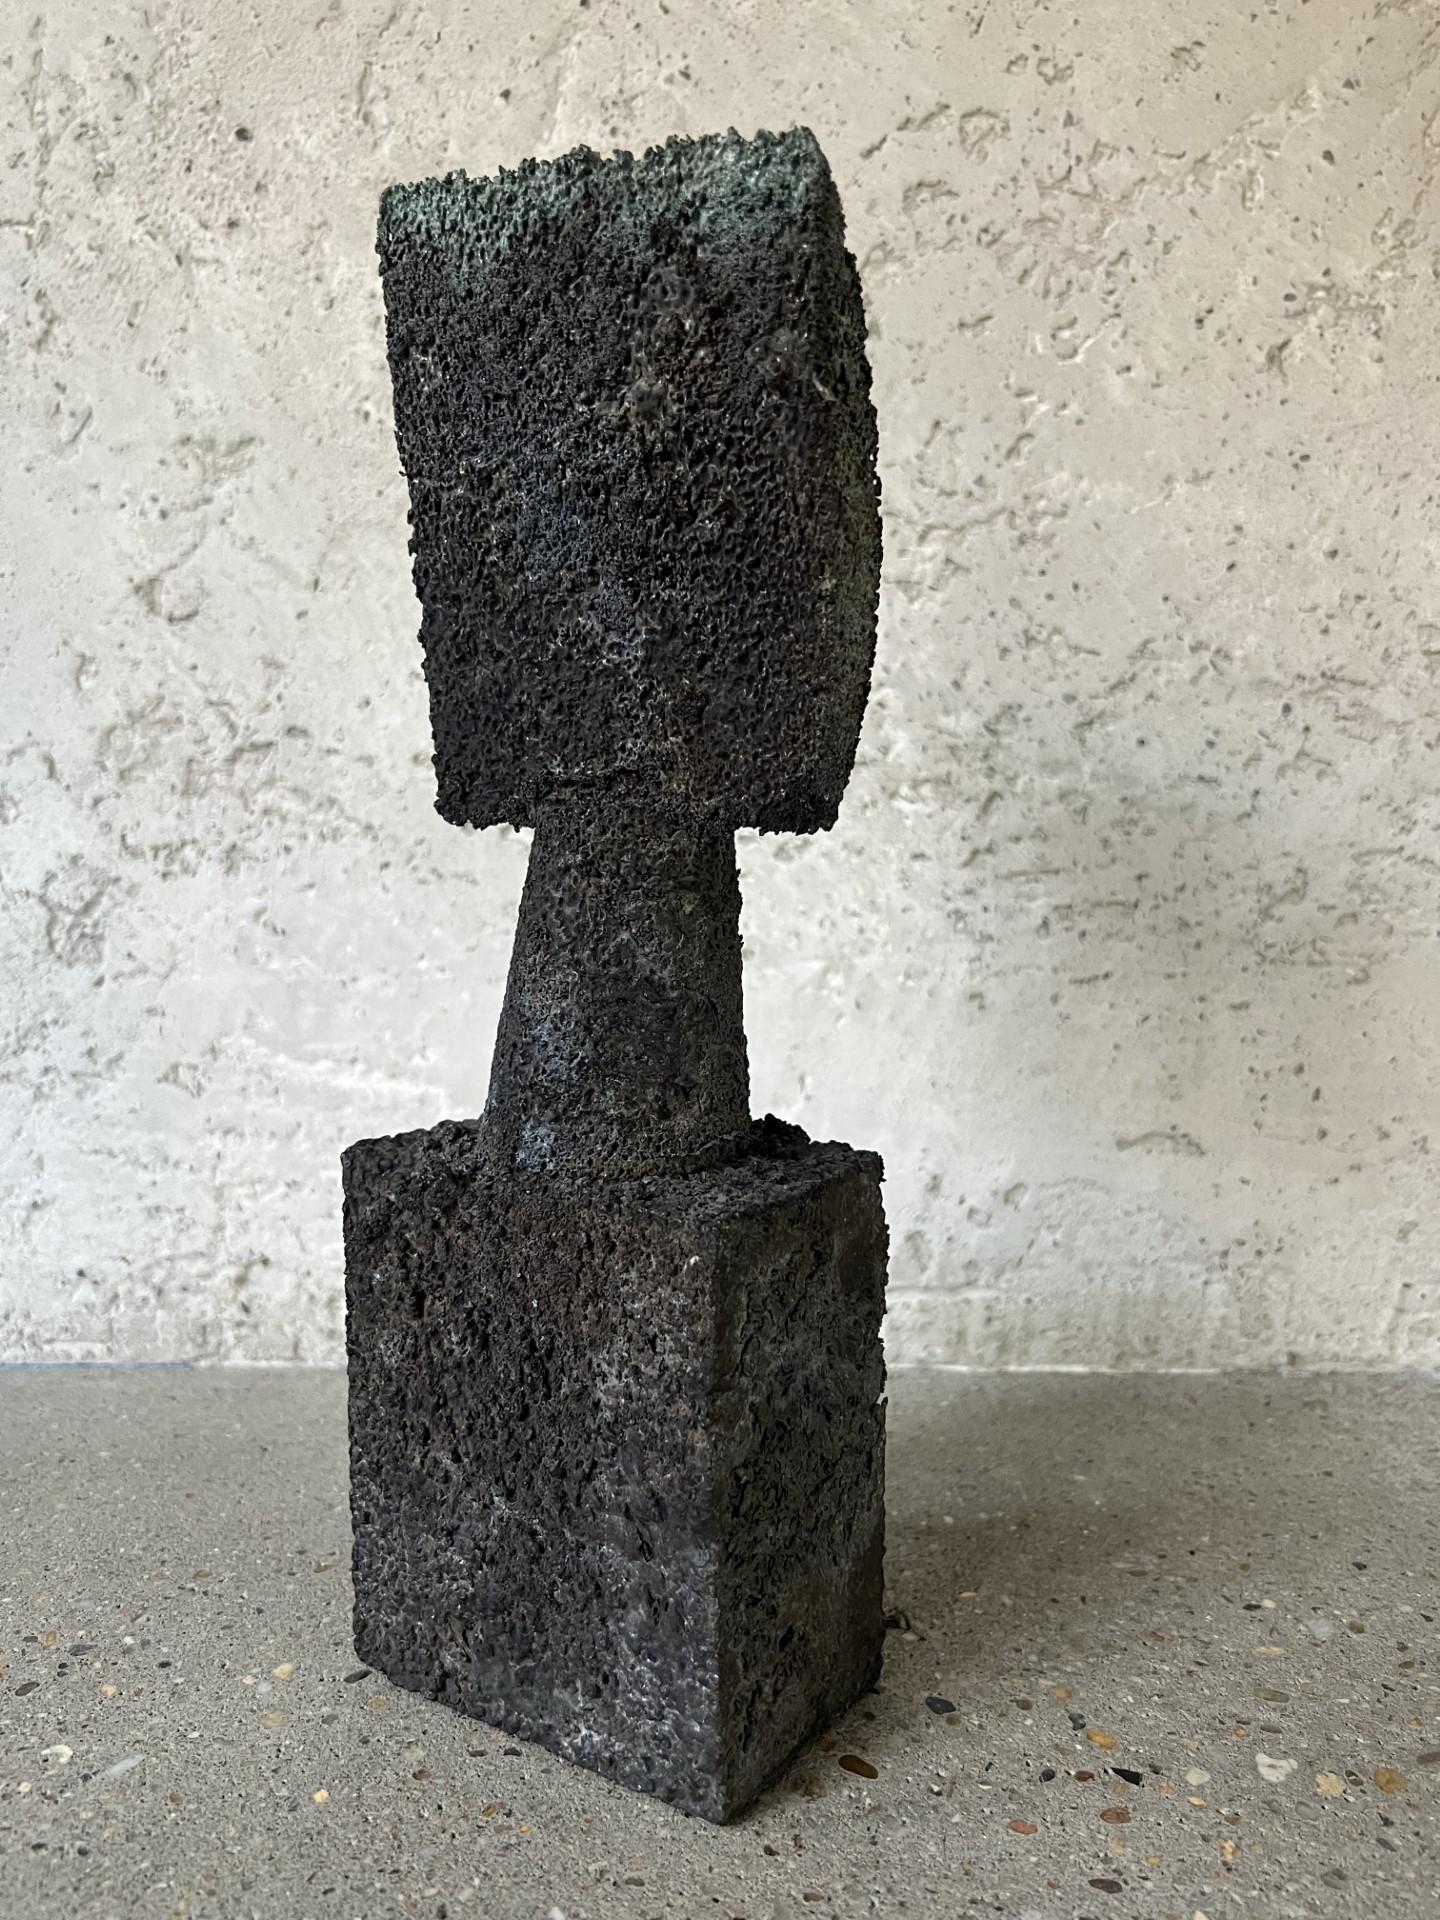 Artist: Elliot Bergman
A sculpture of primitive forms based on African artifacts and mid-century art forms